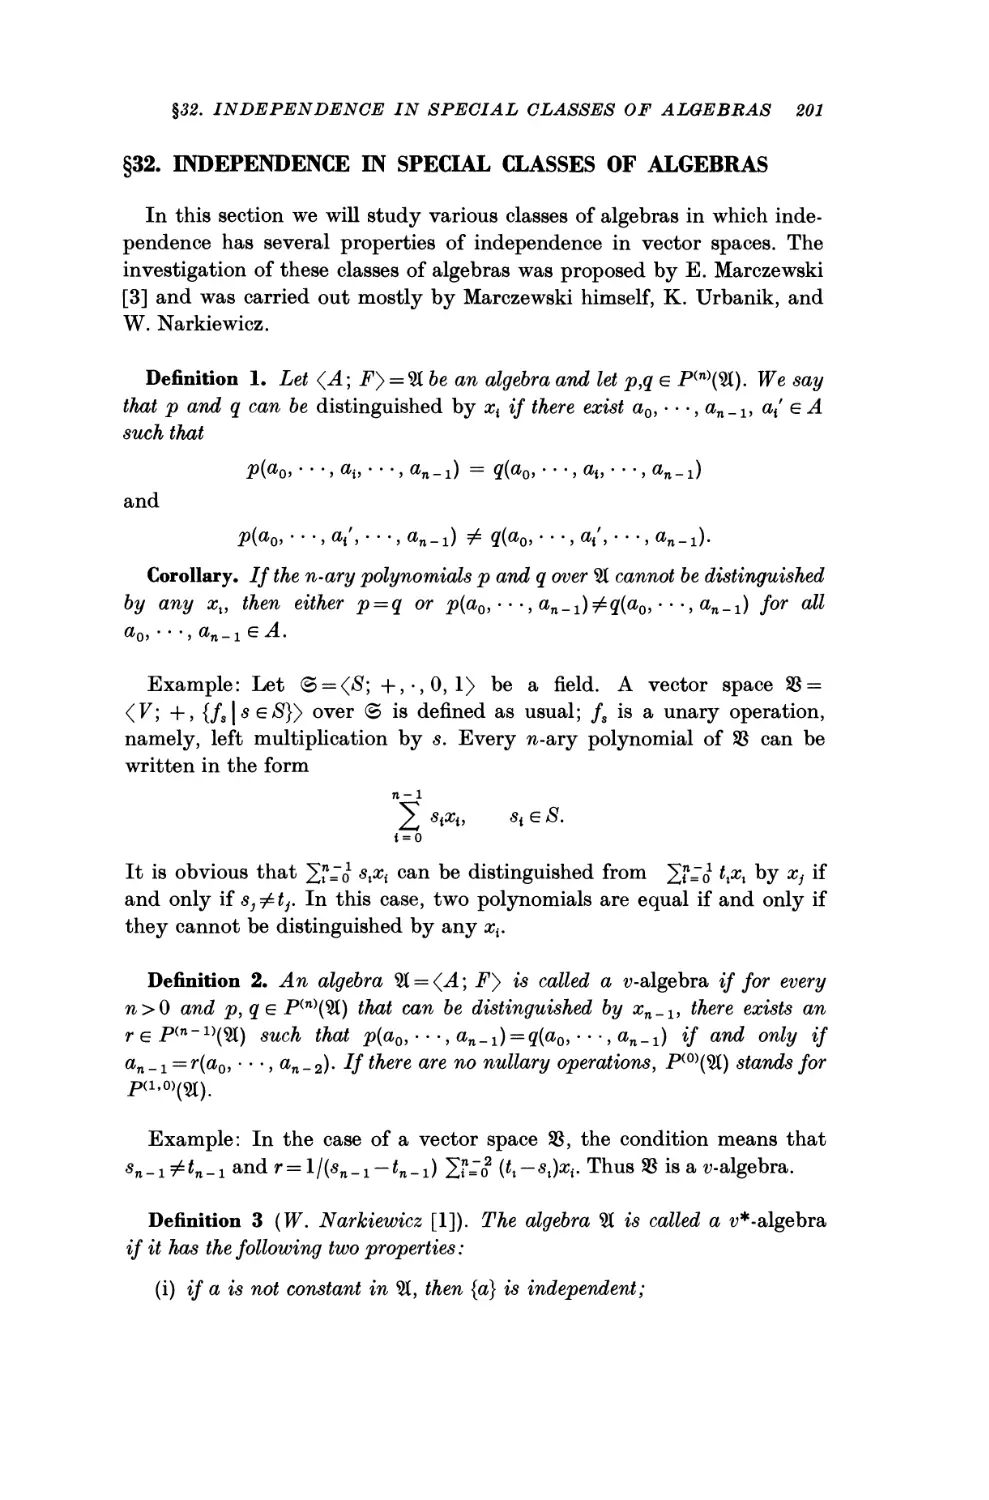 §32. Independence in Special Classes of Algebras